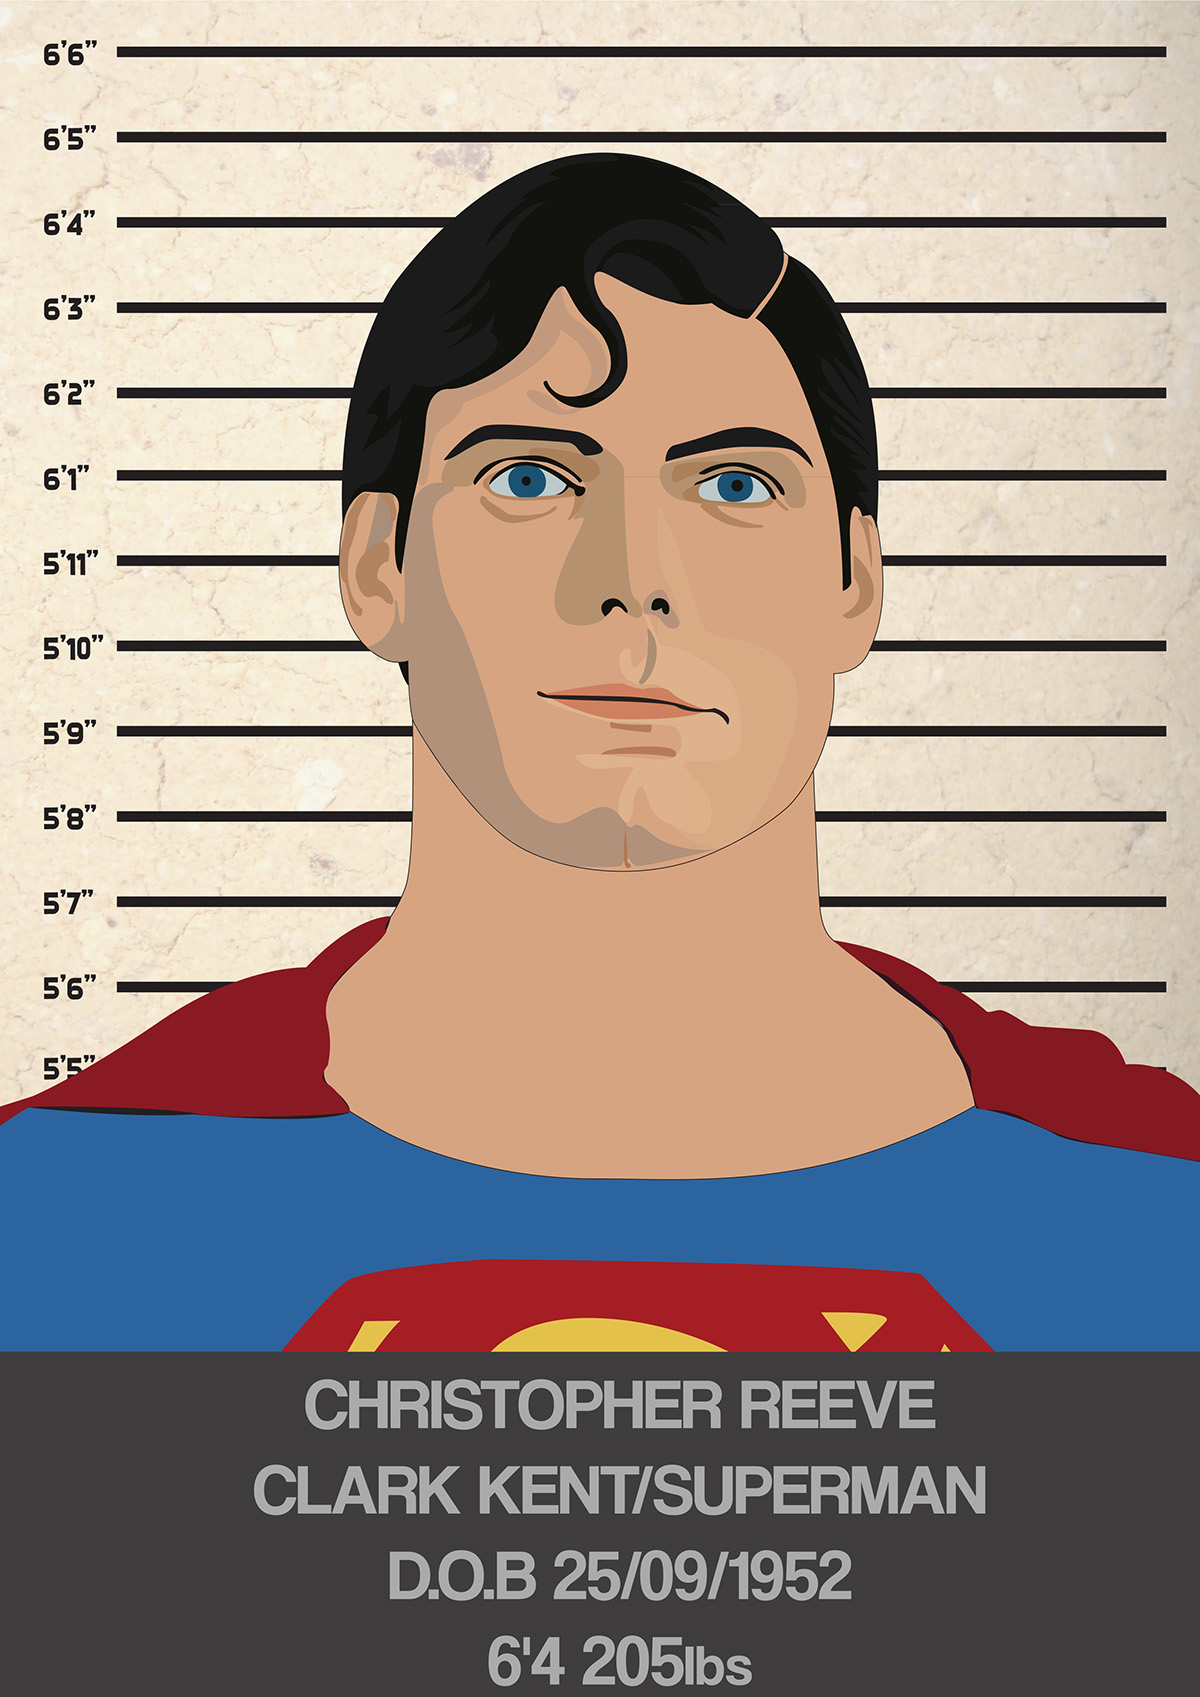 superman batman robin joker the super Hero villain evil Good 2010 1960 2011 2009 graphic vector art ars Illustrator photoshop 1960's Classic comic dc book Theo richards NCN New College Nottingham Nottingham Trent Uni University heroes villians Heroes & Villians new dark knight Superman Returns batman begins poster infographics SuperGraphics llustration inspiration daily best of week wallpaper sites fonts freebie free tutorial iphone Pixelmator photo manipulation posters video illustrations houses iPad contest digital interview Retro vintage HDR type ads logo gadgets giveaway FFFF Logo Design websites offices product video case study 3d Typography Mania TTT art download architect Day textures Cinema colors icons Christmas flickr pictures effects Collective  designers T-Shirt Design Office france Exhibition  press-release Nature photos artwork housing sketches Flash css trip black surreal print collage news Event 4d 80's paintings guest post Headquarters Fun motion Graffiti Brazil cartoon creative spain web 2.0 graphics funny reader tips the world collabs digital illustration Character t-shirt quick tips comics drawings fireworks sculpture Blog portraits Movies abstract Computer Collection abduzeedo abdutees colorful light Russia portfolio color designer inspiração depthcore watercolor Web logos digital painting container geometric Lomography sunset